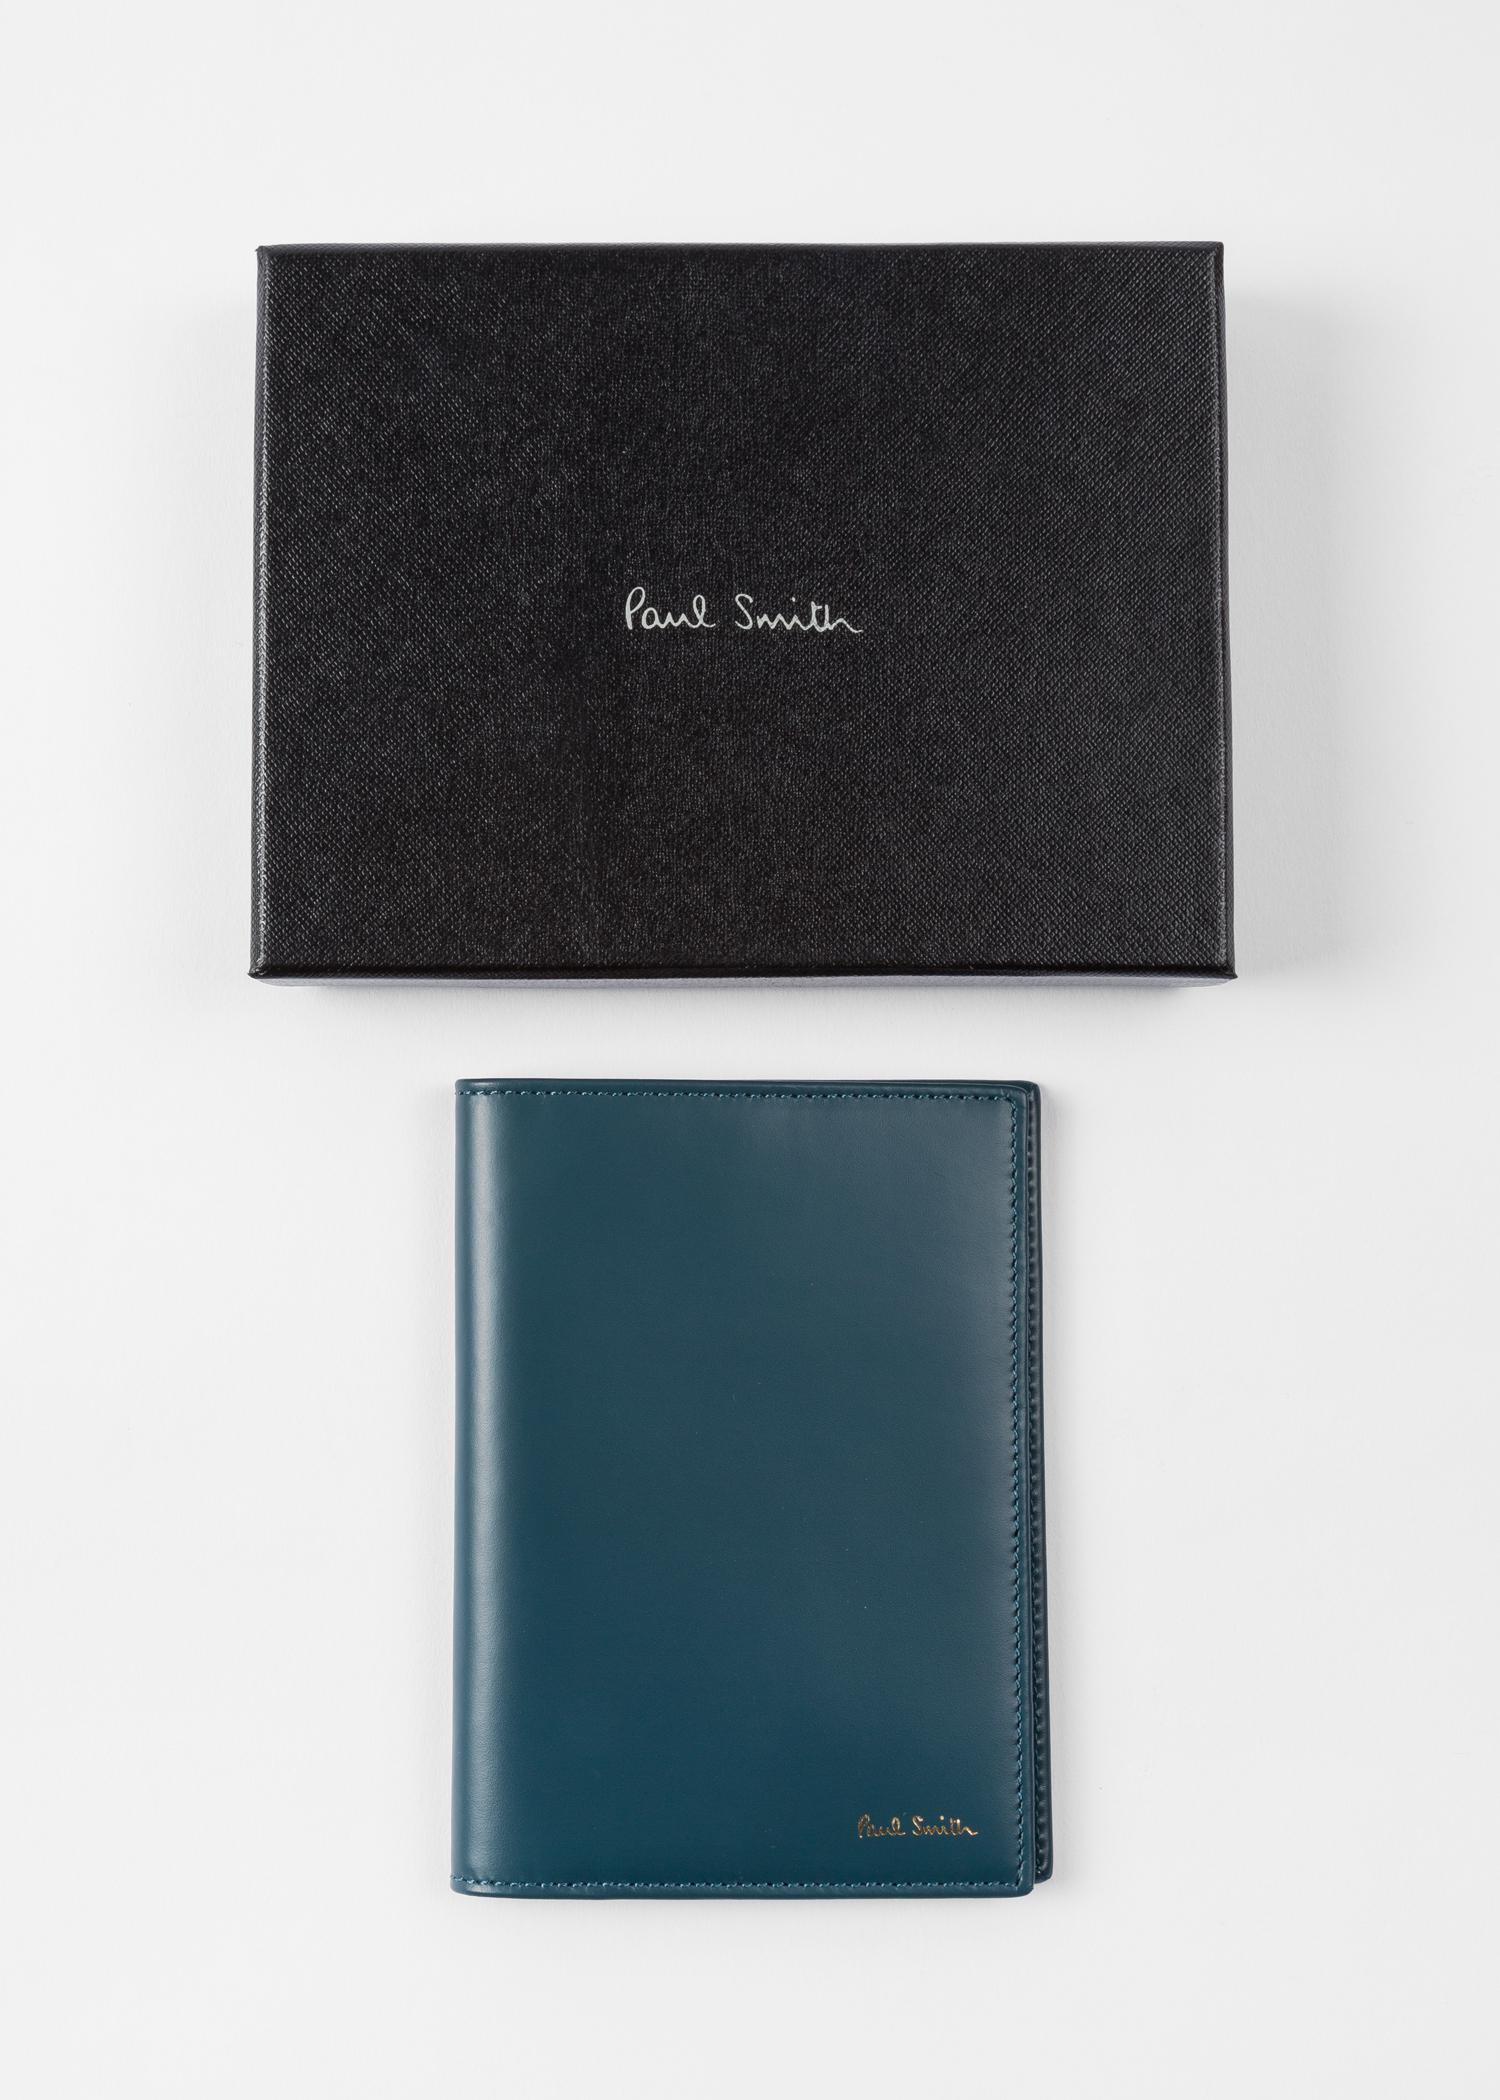 Paul Smith Teal Signature Stripe Interior Leather Passport Cover for Men - Lyst